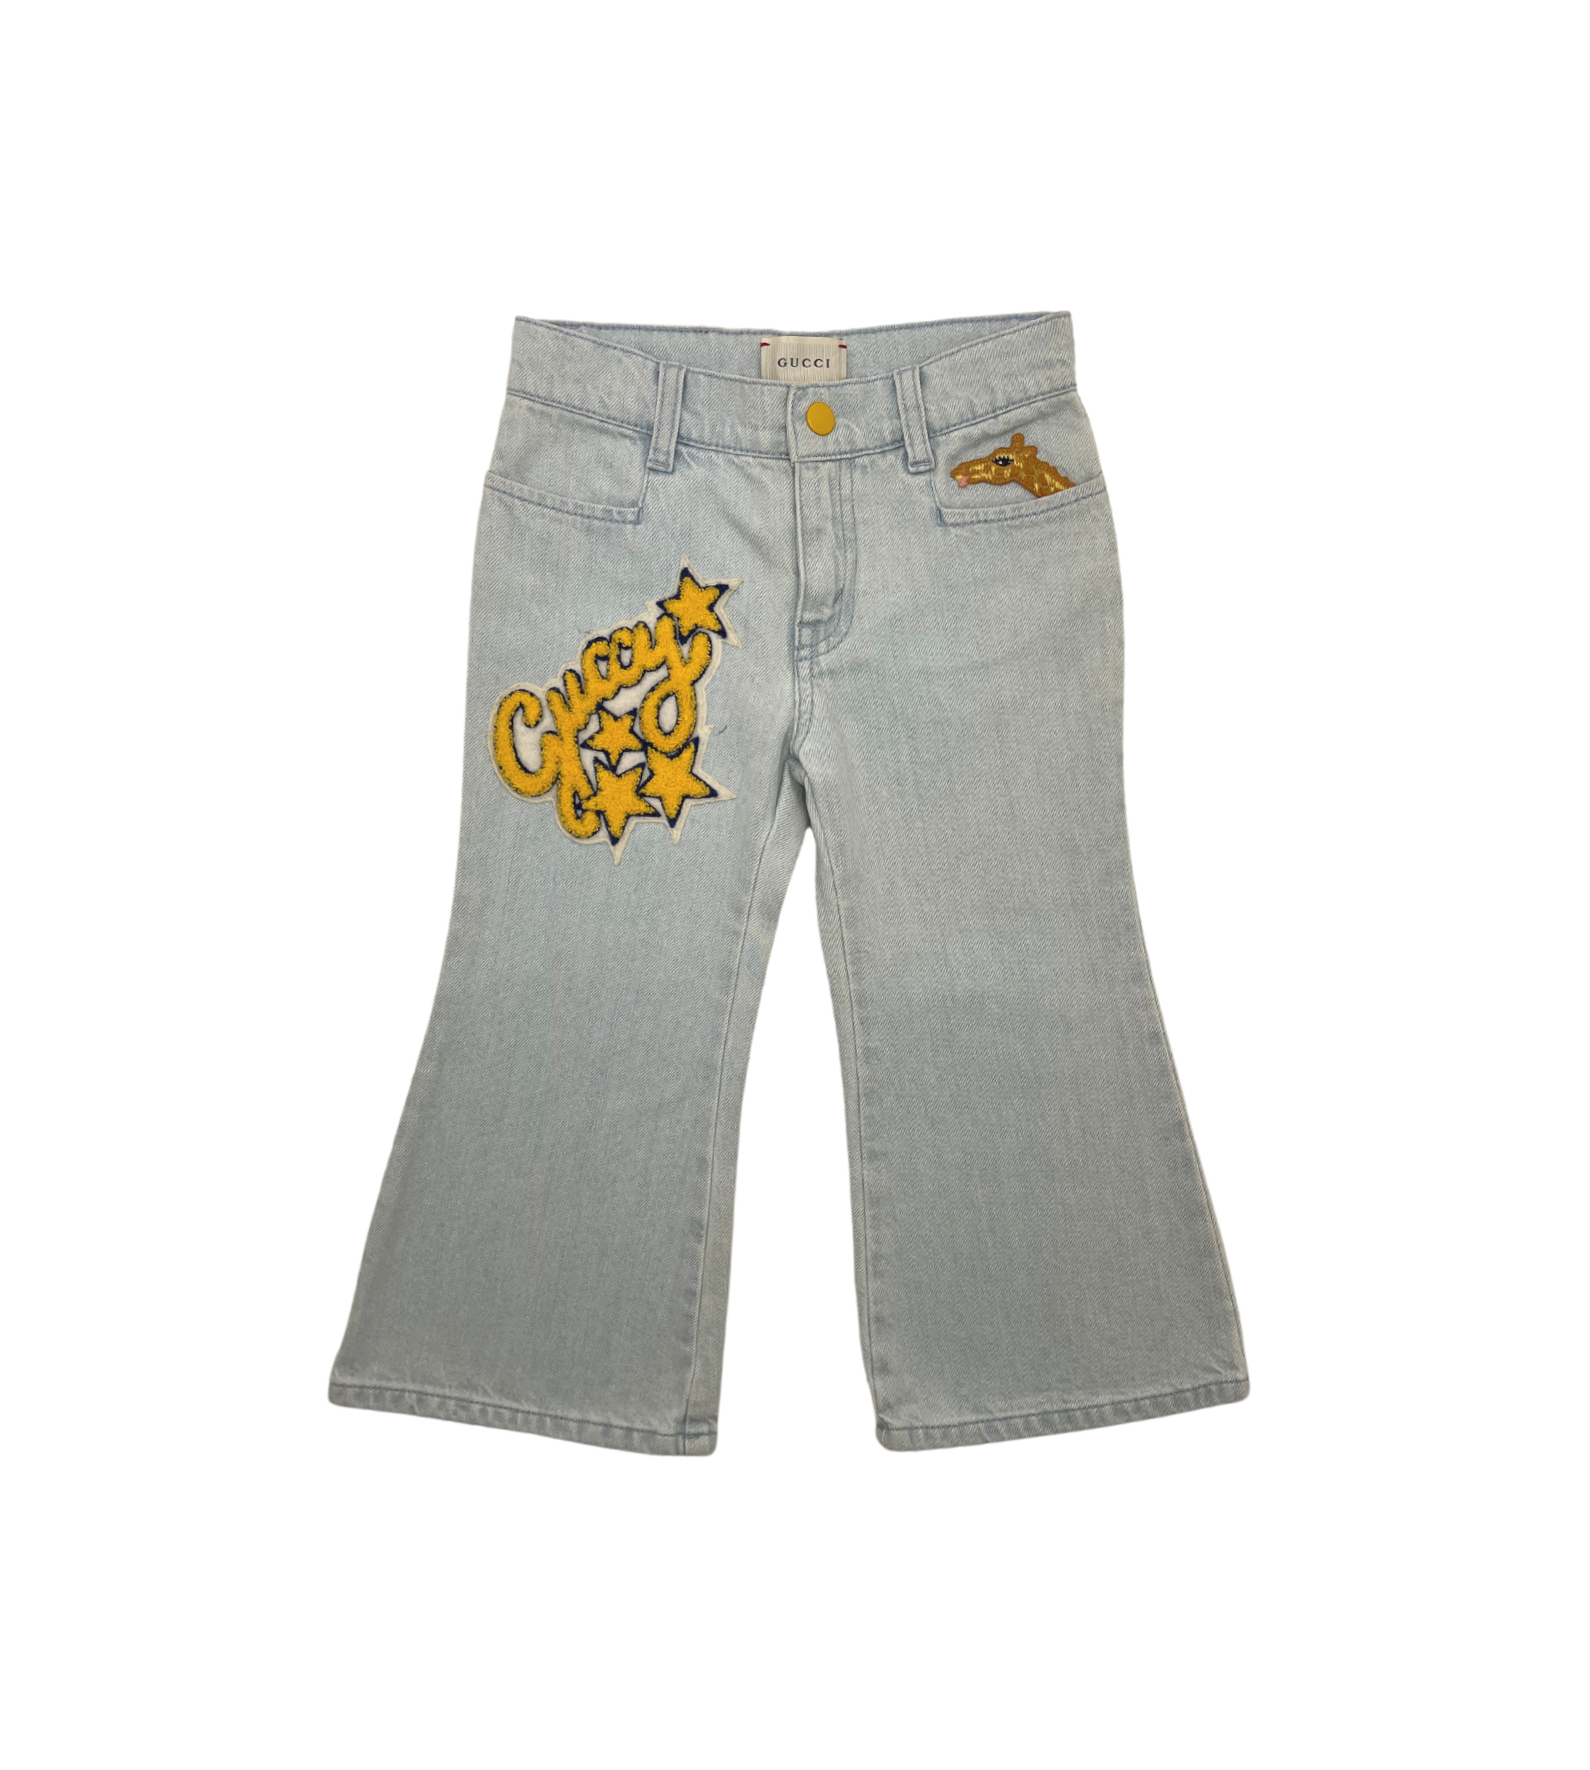 GUCCI - Light blue jeans with yellow patches - 4 years old